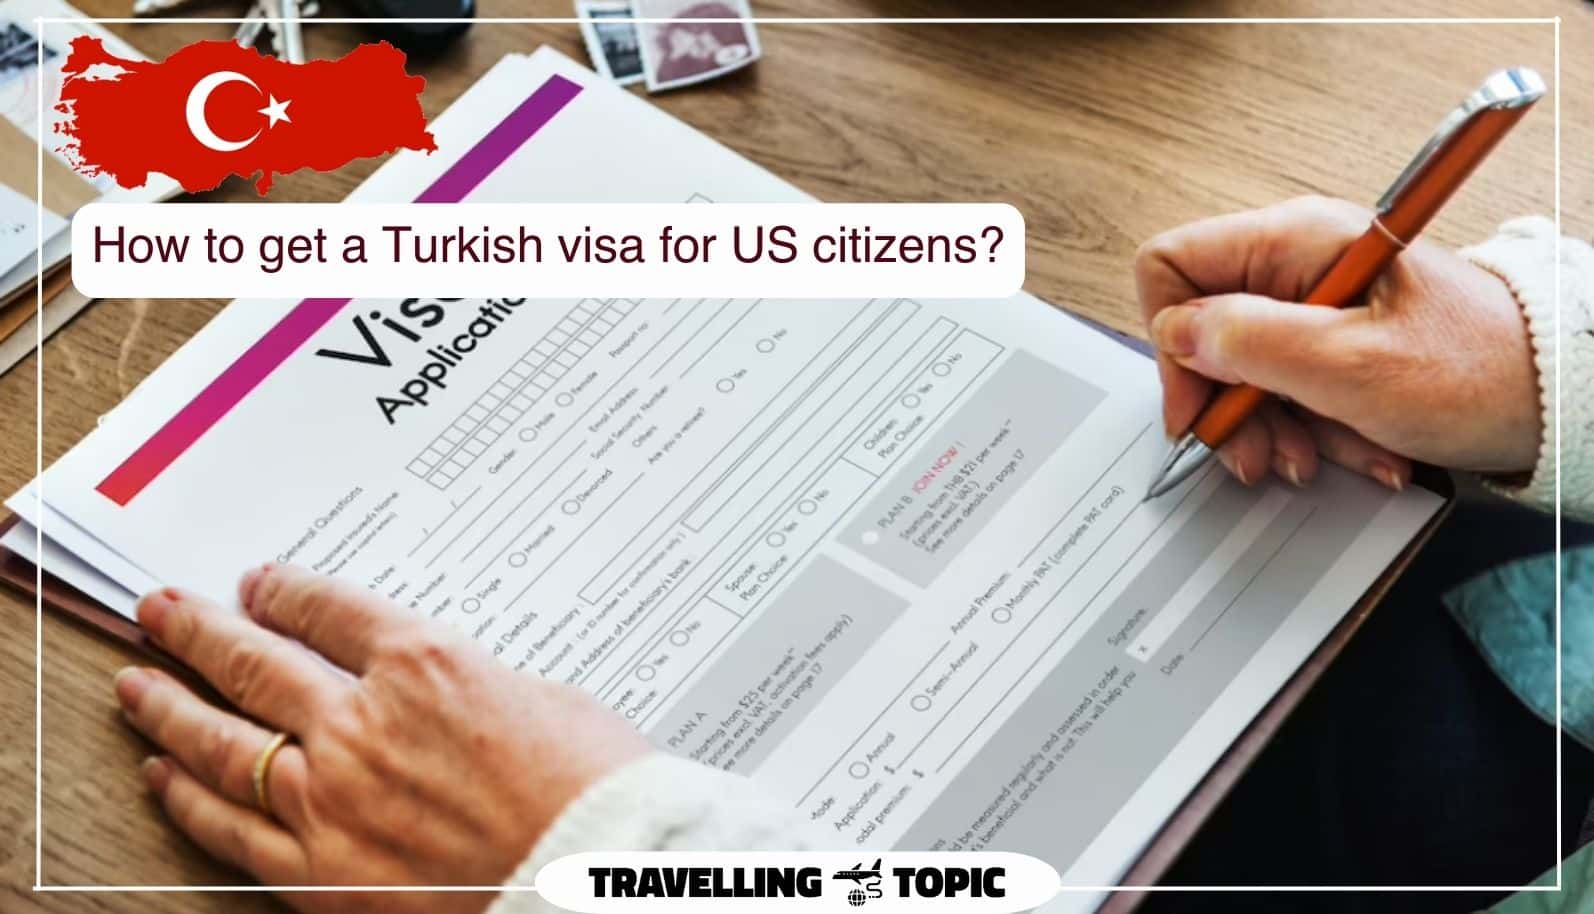 How to get a Turkish visa for US citizens